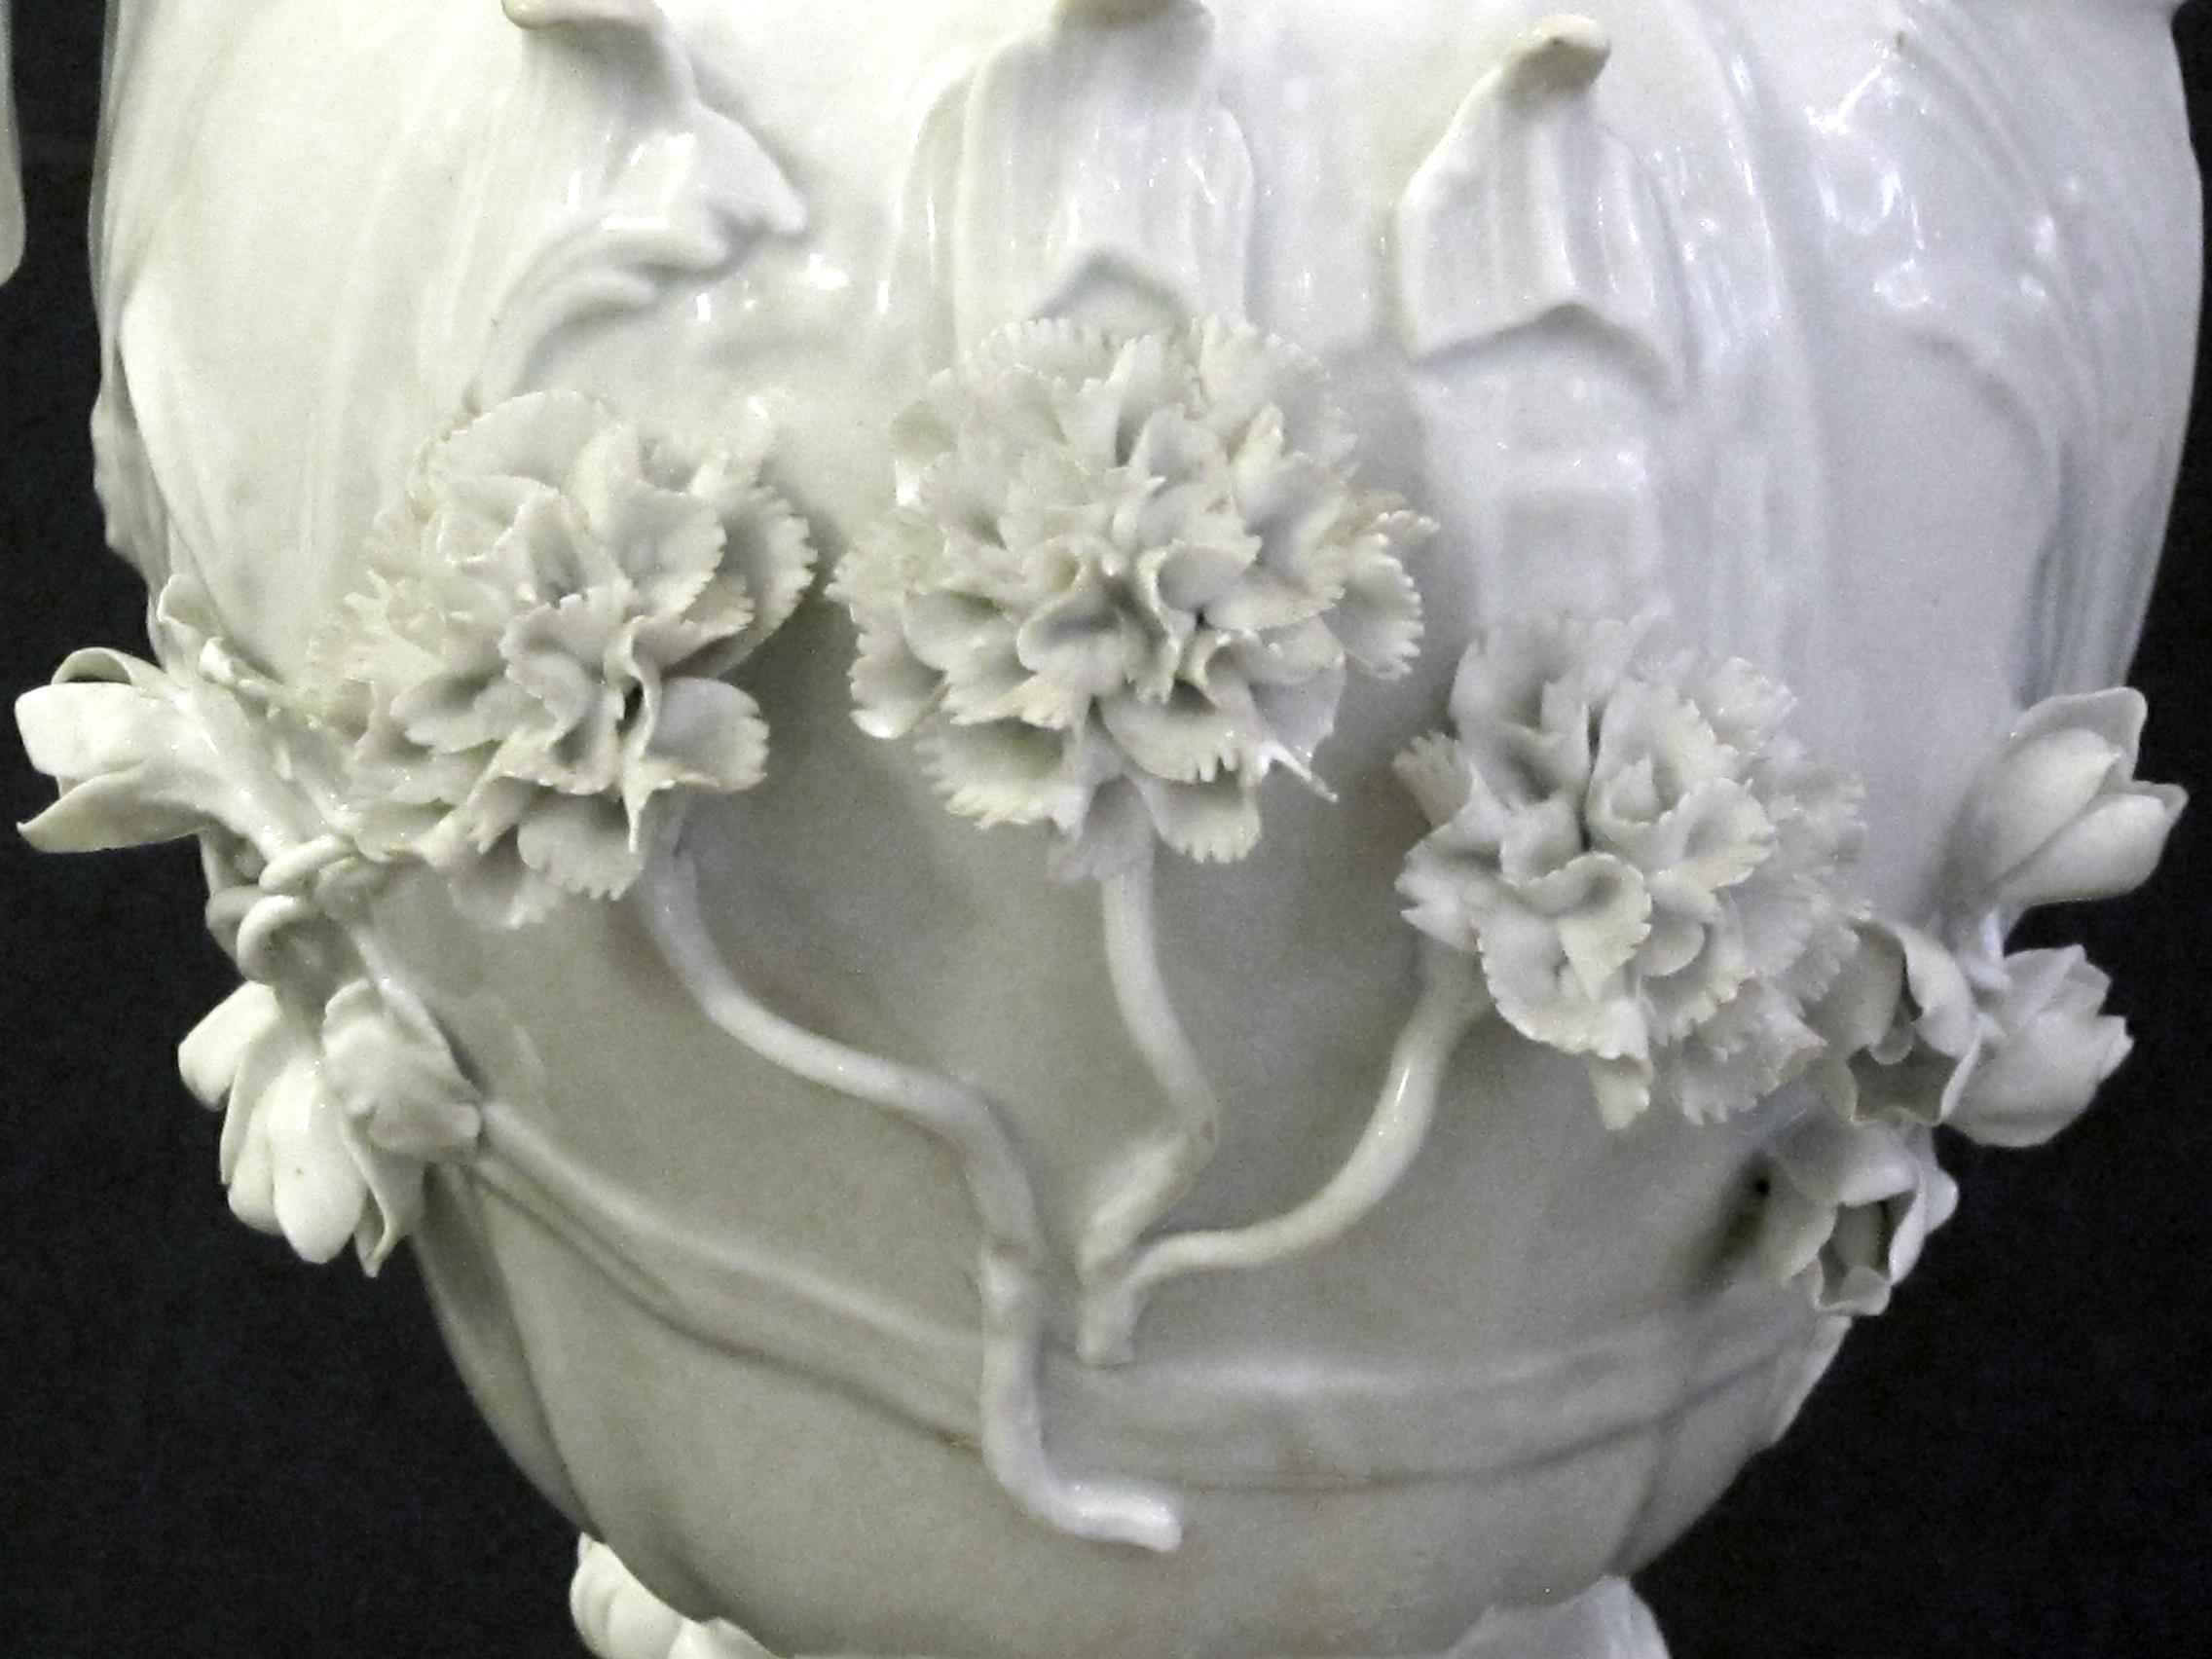 Early 20th Century Finely Rendered Pair of French Rococo Style Blanc-de-chine Urns or Vases